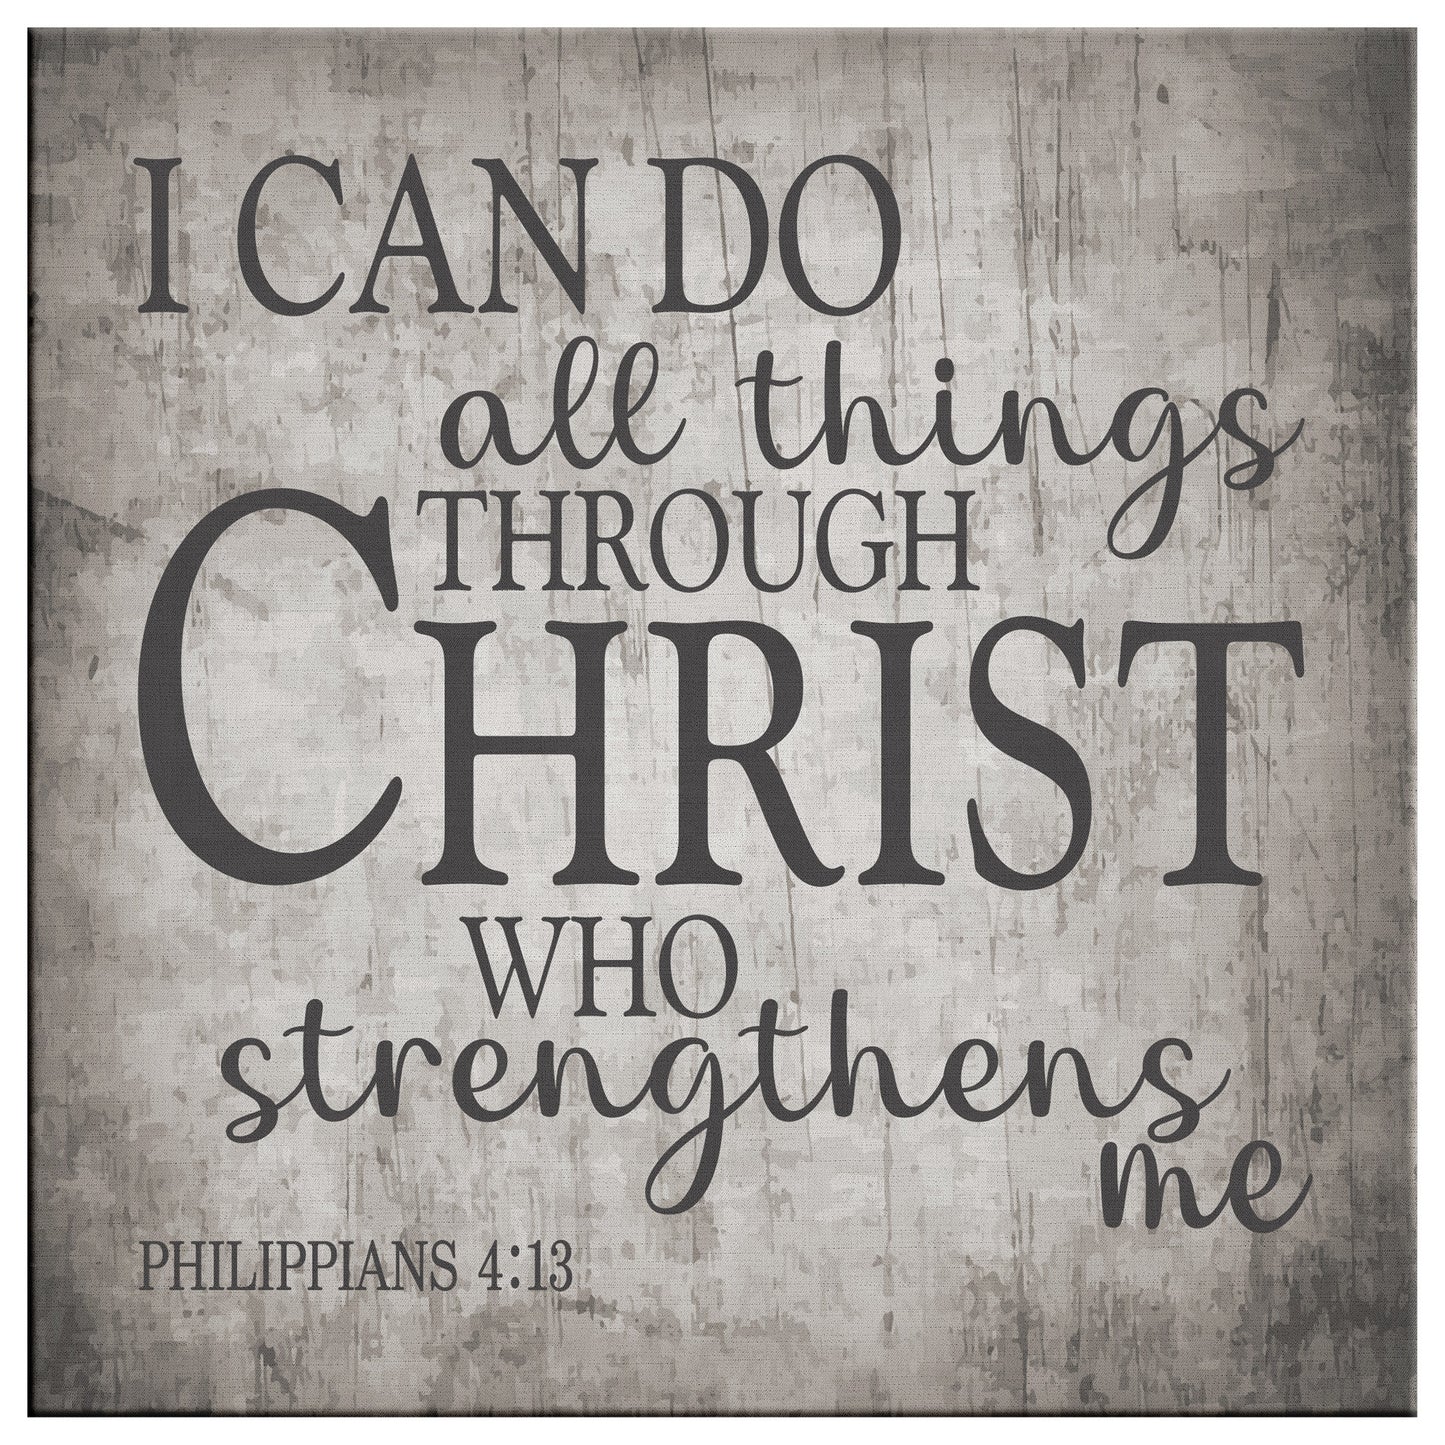 I Can Do All Things - Philippians 4:13 Premium Square Canvas